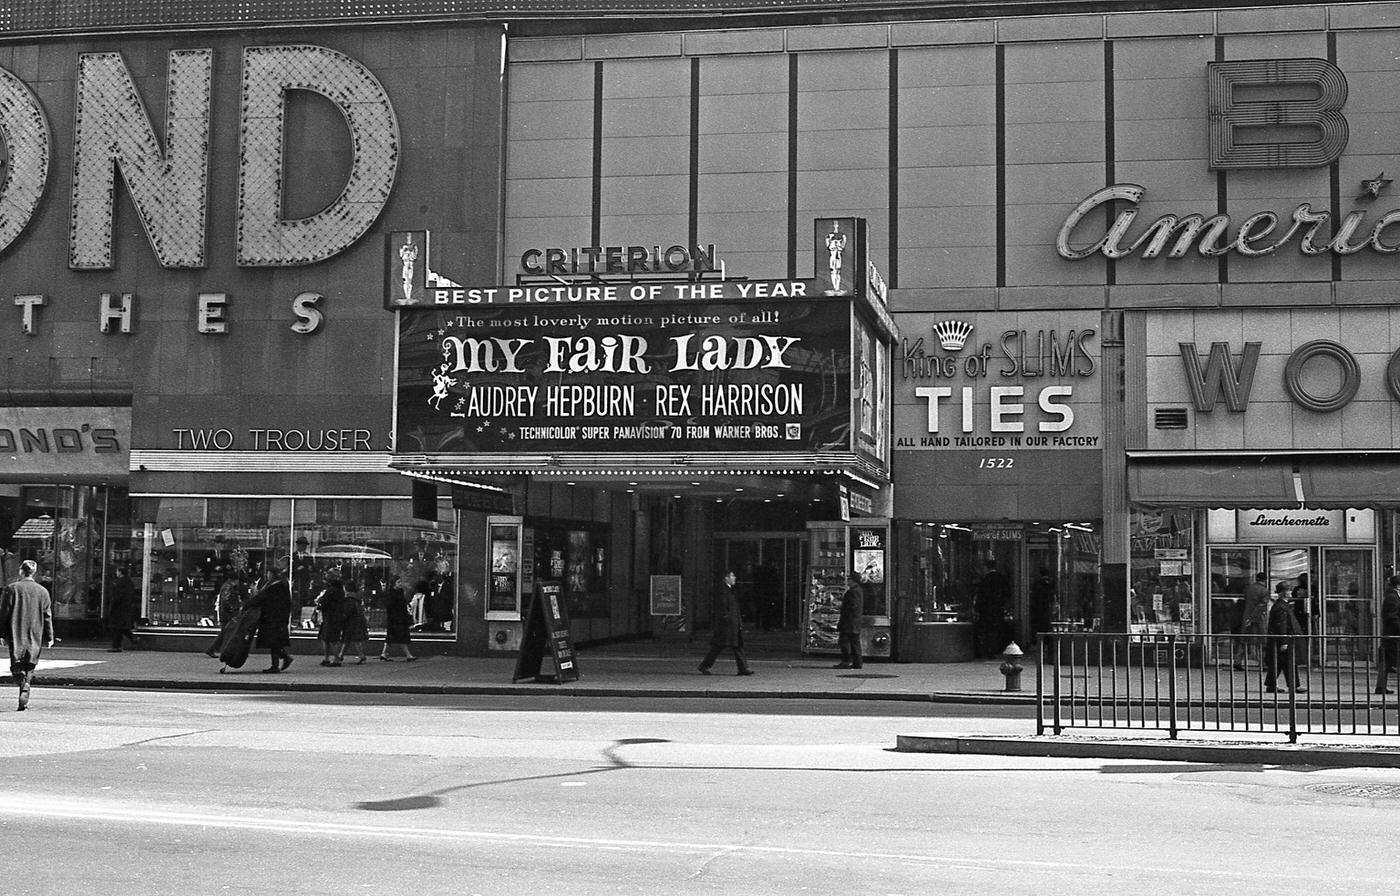 Pedestrians Walking Past Criterion Theater Advertising 'My Fair Lady' In Times Square, Manhattan, 1966